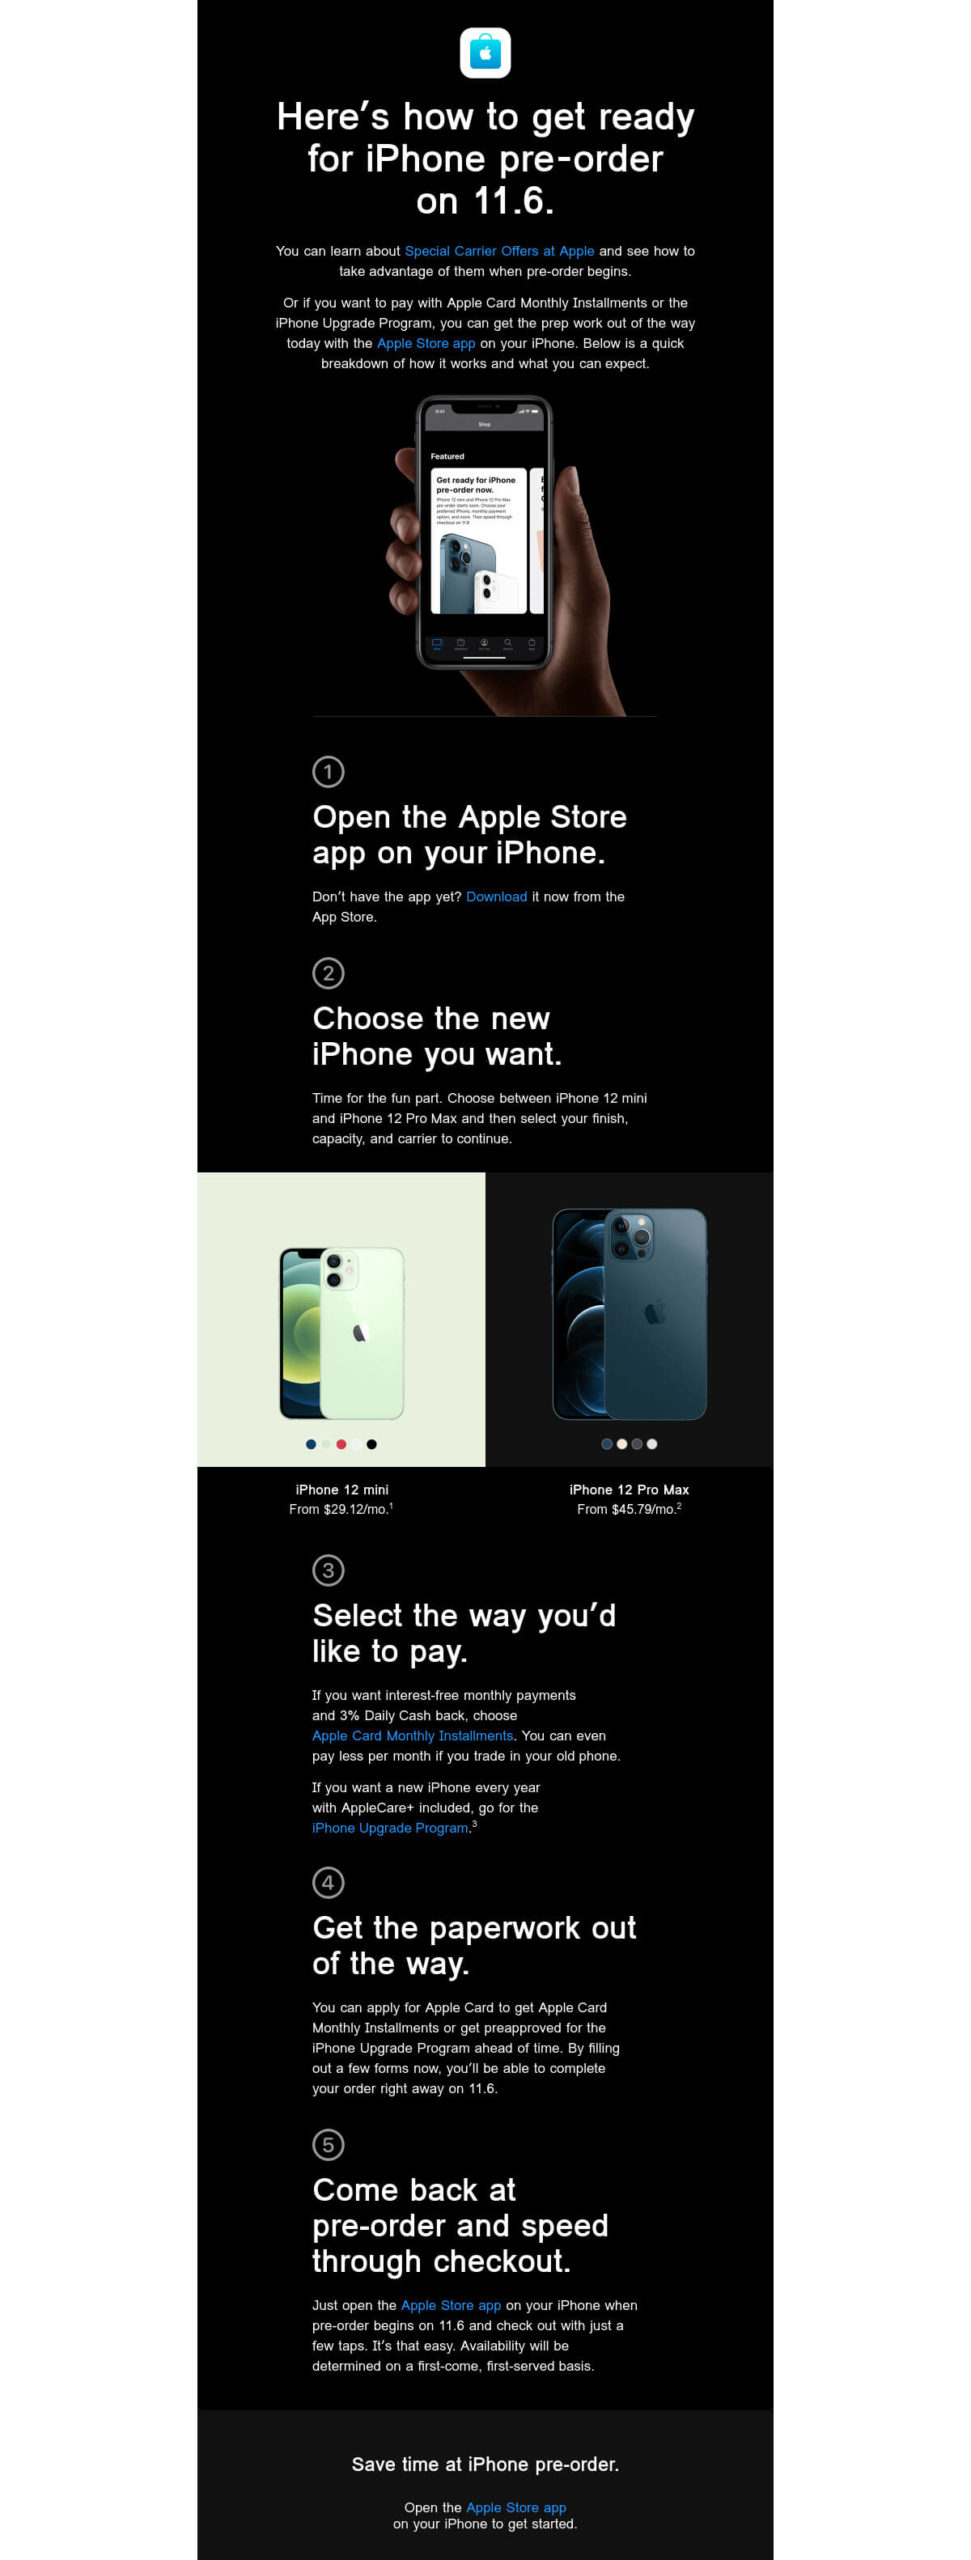 Apple's pre-order email for iPhone 12 sets a benchmark on many levels